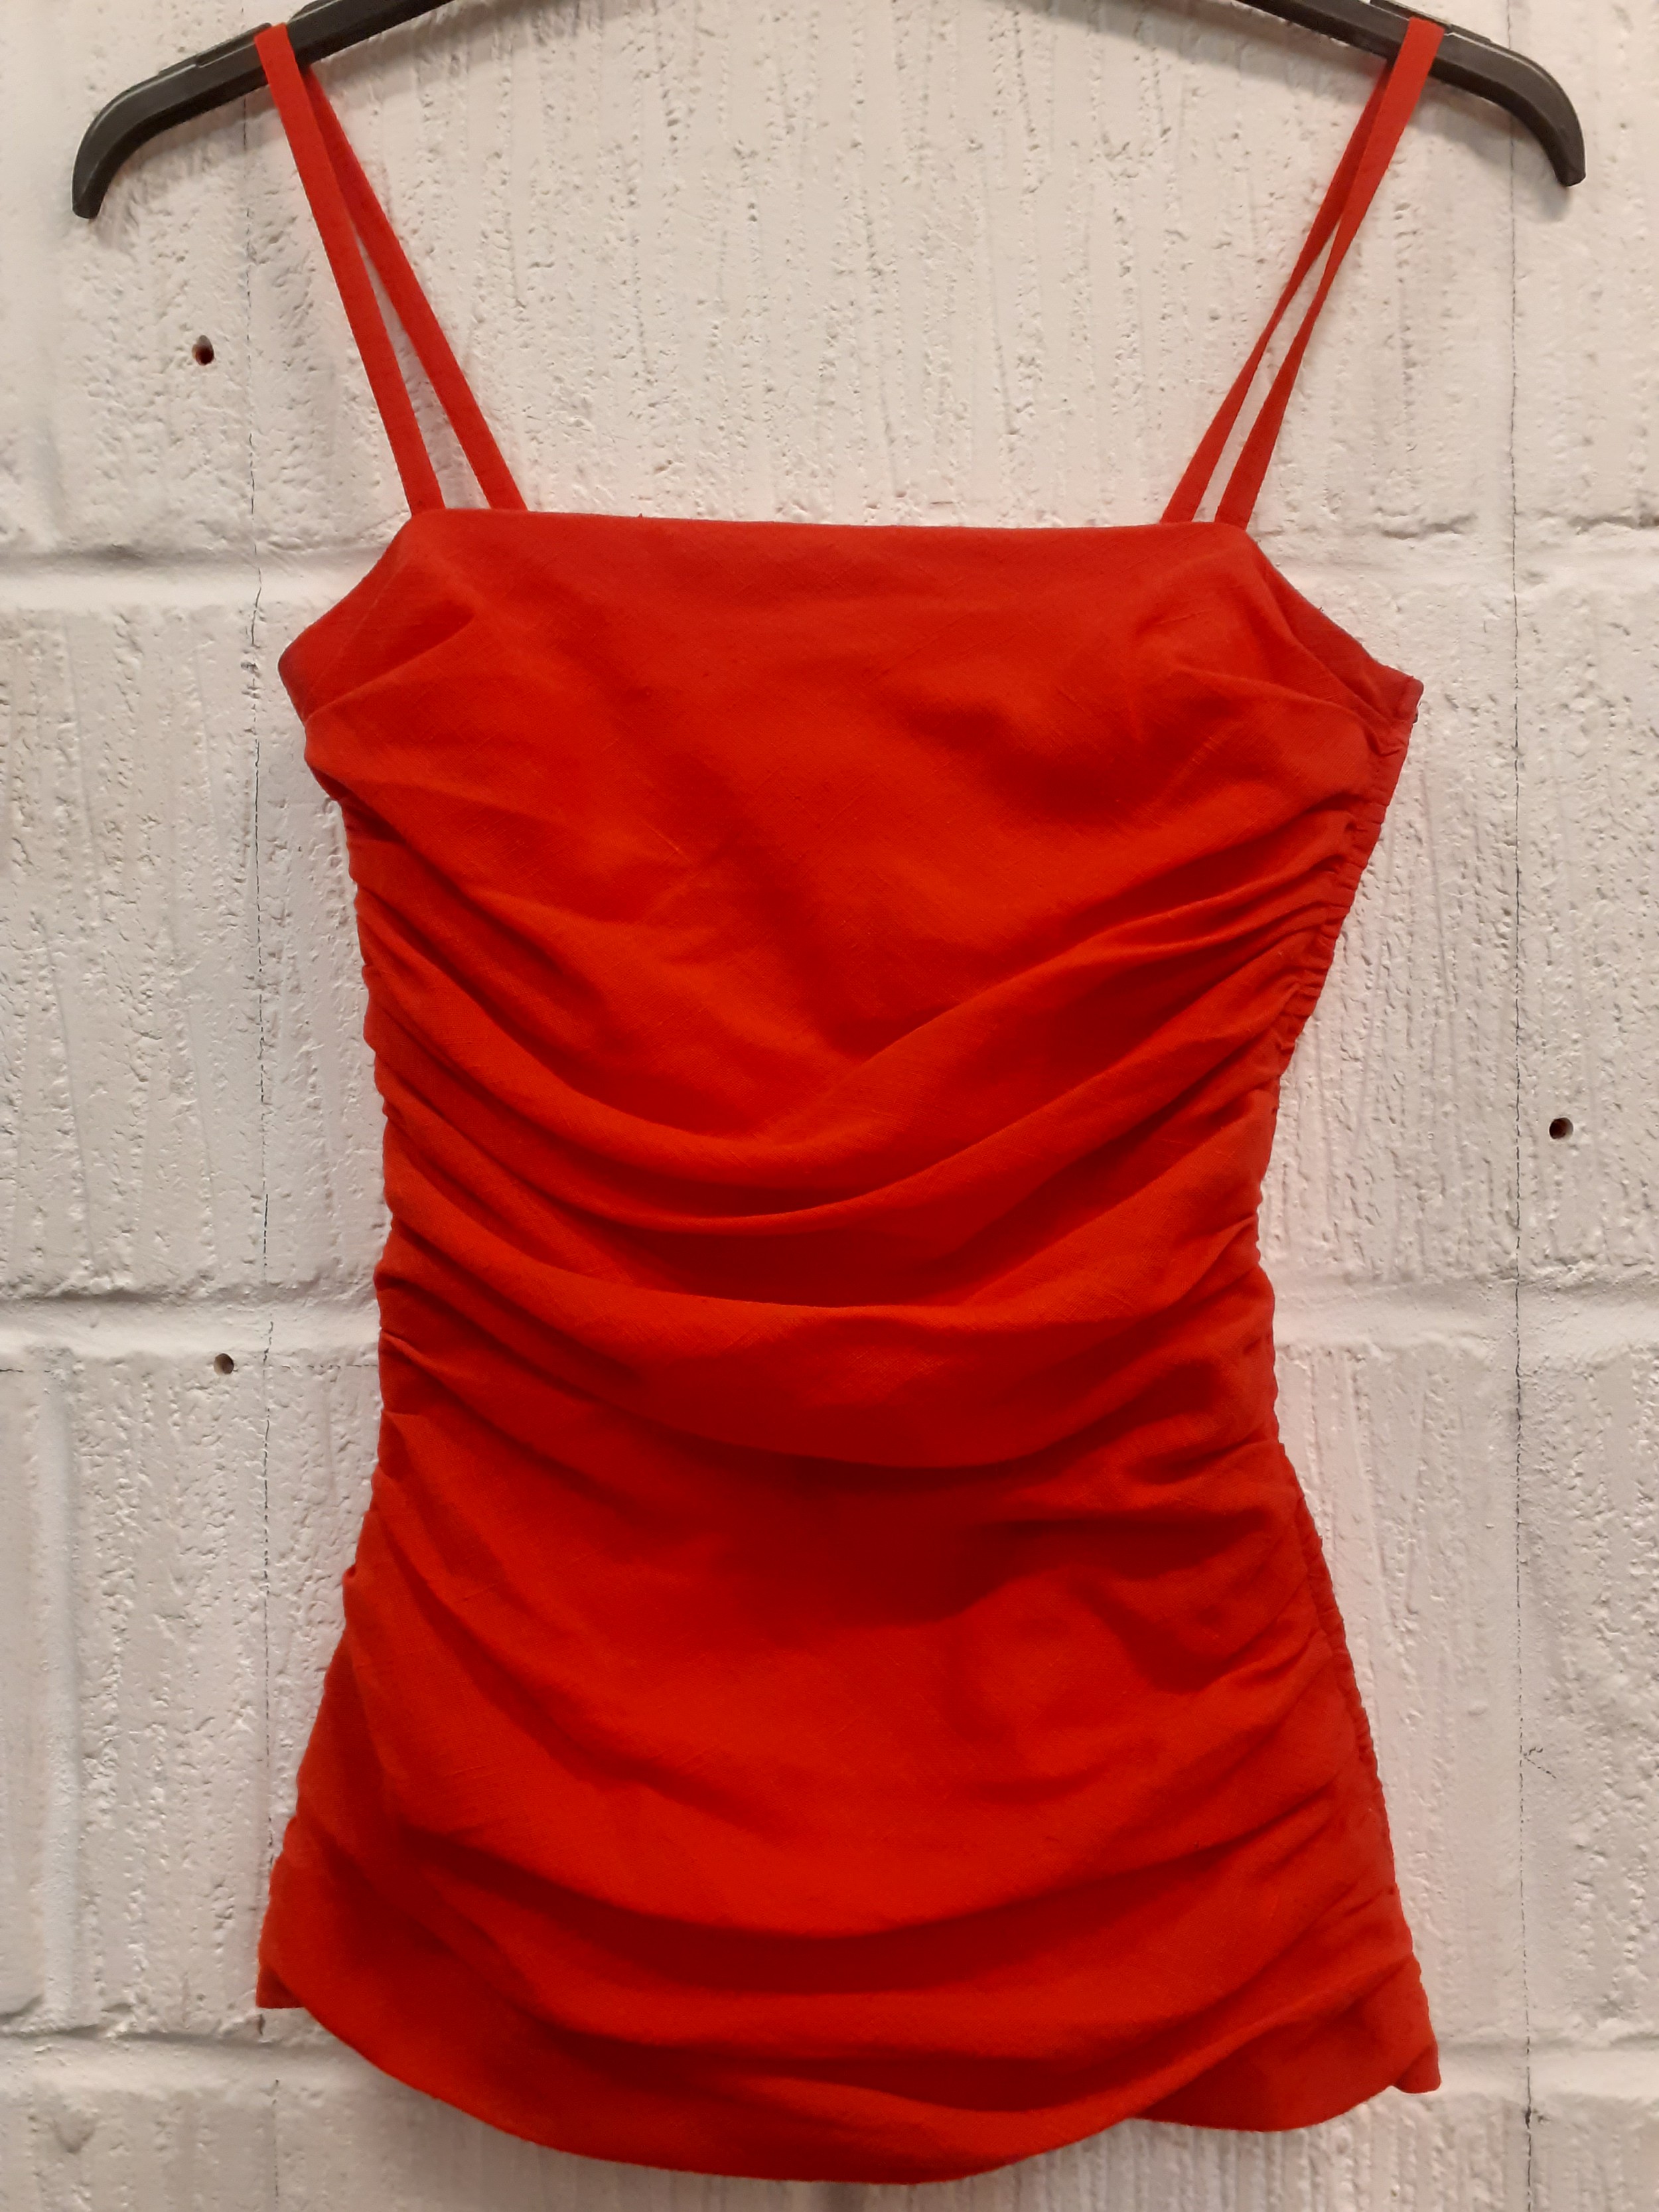 YSL-A Saint Laurent Rive Gauche red ruched top with shoulder straps and side zip, European size 36 - Image 17 of 18